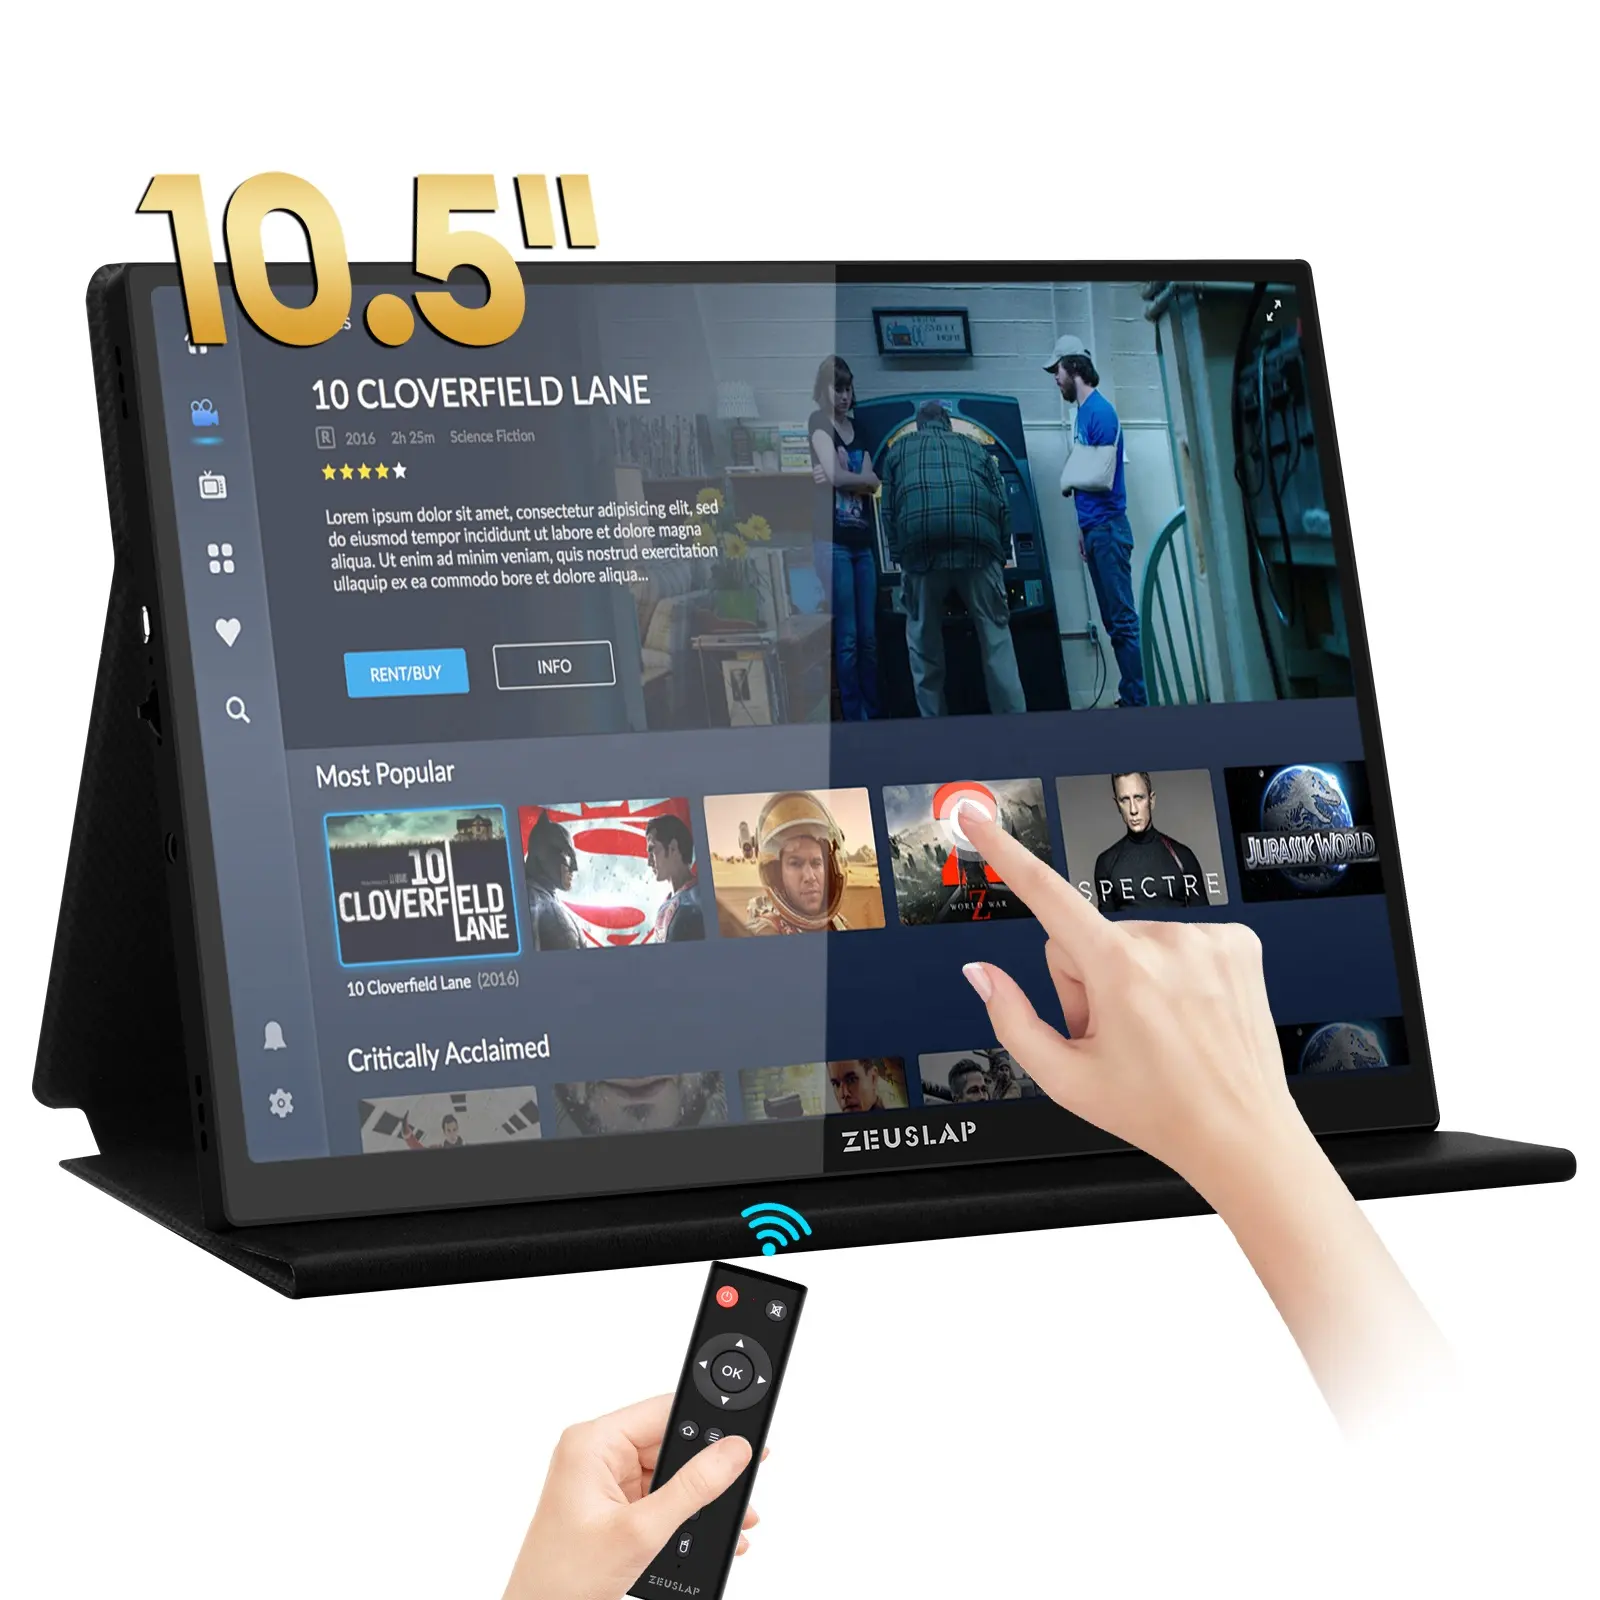 10.5 inch IPTV Touch Screen Smart Tv 100% sRGB 420cd/m2 Portable Monitor for laptop phone xbox ps5 Switch